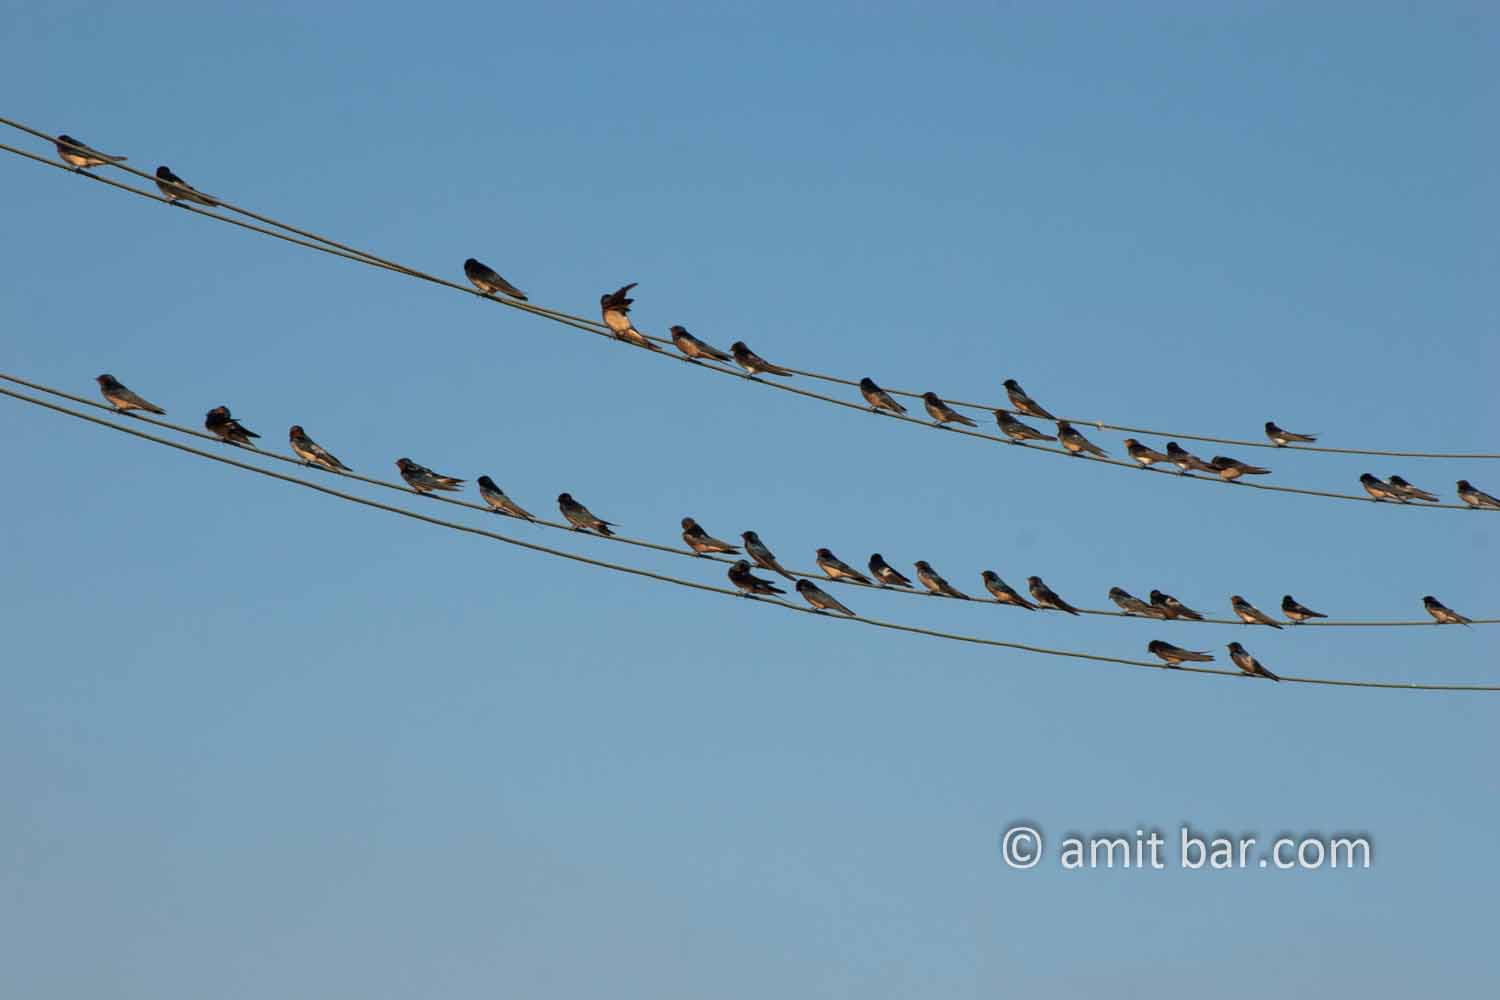 Swallows I: Swallows on electric wire